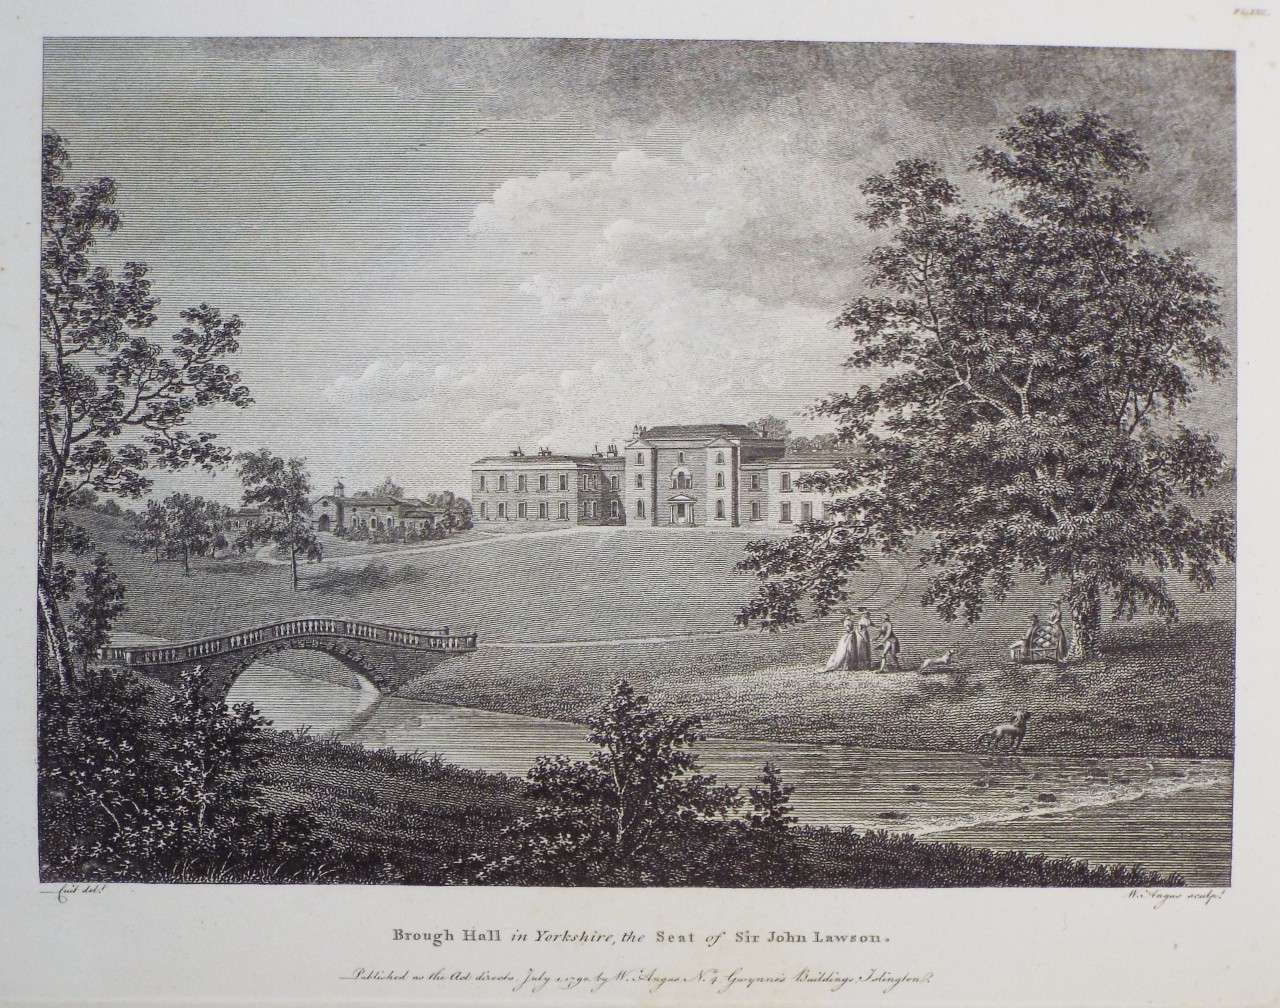 Print - Brough Hall in Yorkshire, the Seat of Sir John Lawson. - Angus